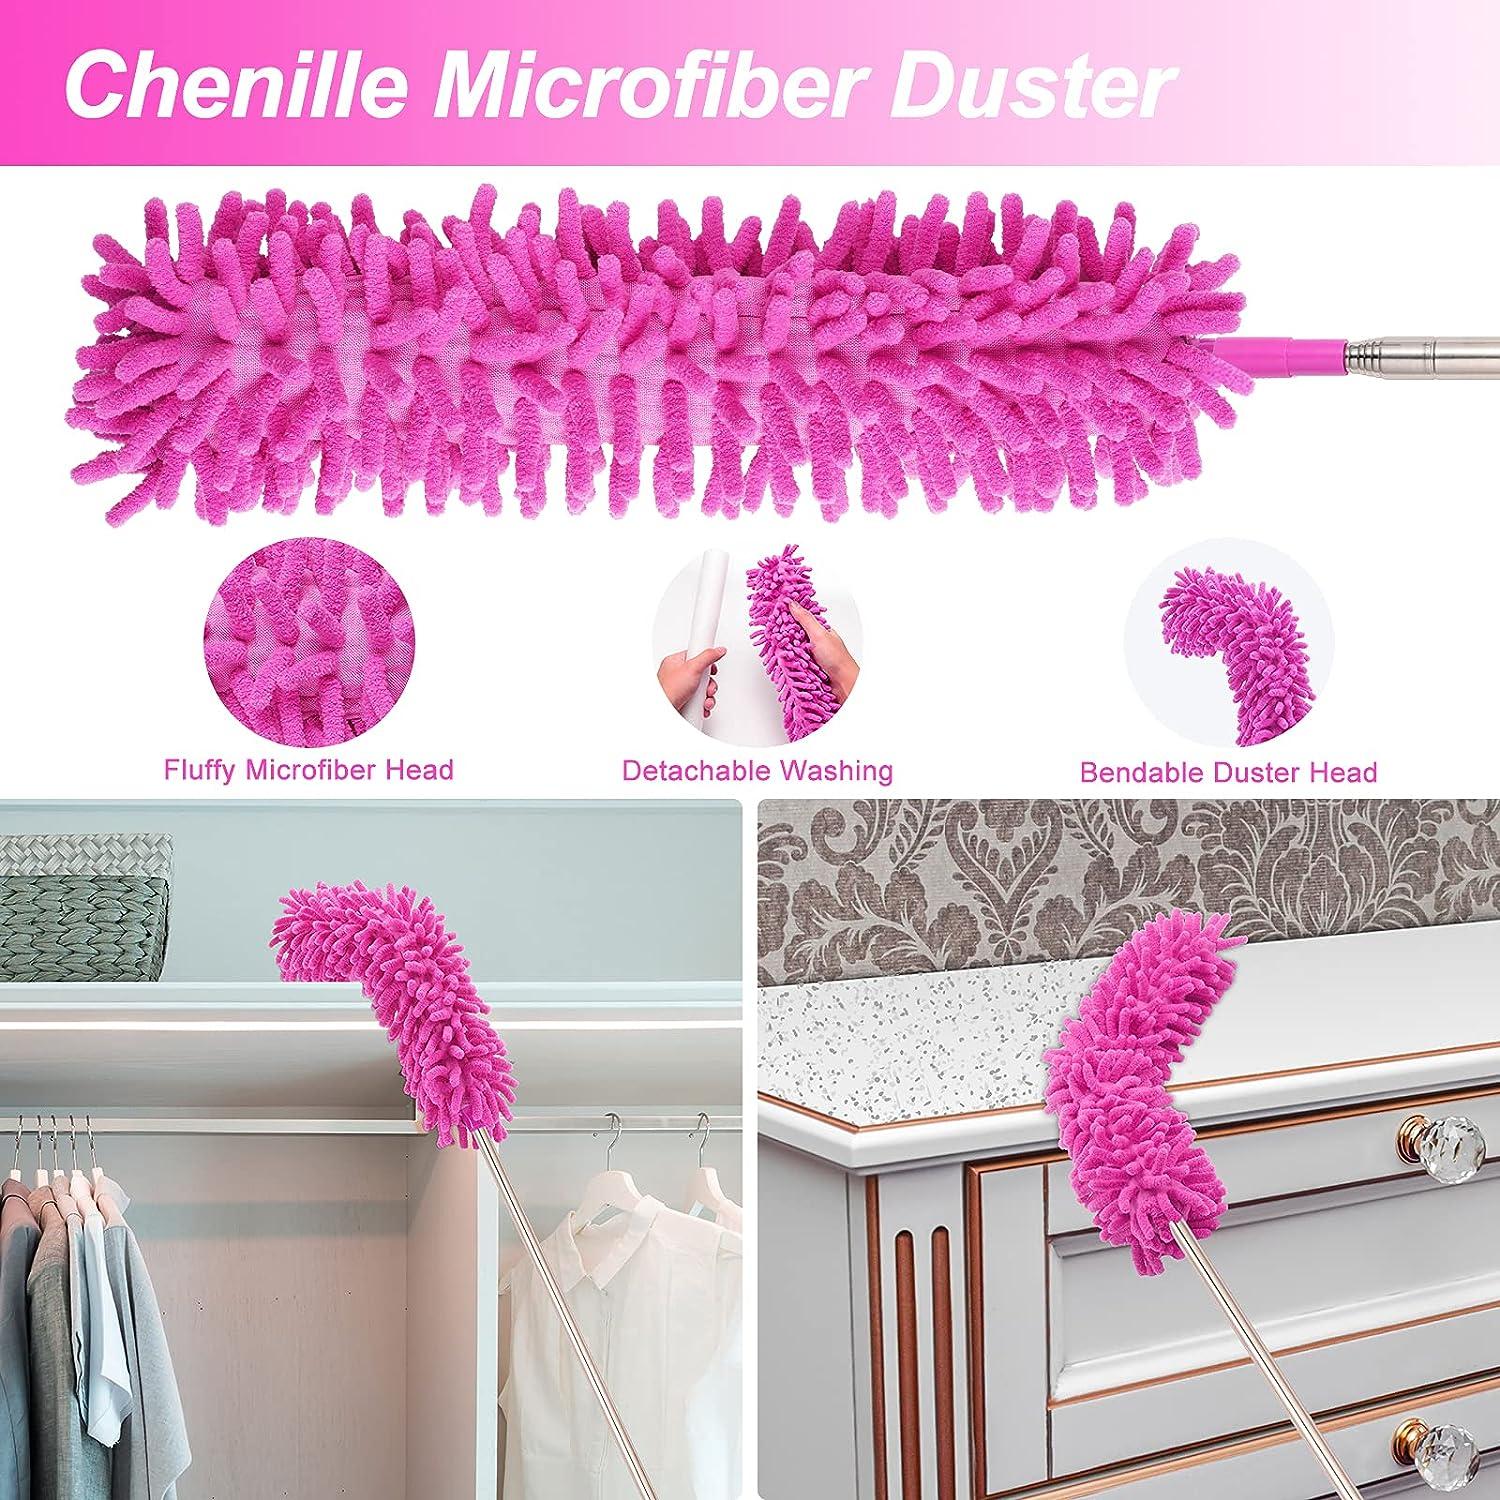  Dusters for Cleaning,6 PCS Feather Duster Microfiber Duster  with 100'' Stainless Steel Extension Pole, Bendable & Washable Telescopic  Cobweb Duster for Ceiling Fan,High Ceiling,Blinds,Furniture & Cars : Health  & Household